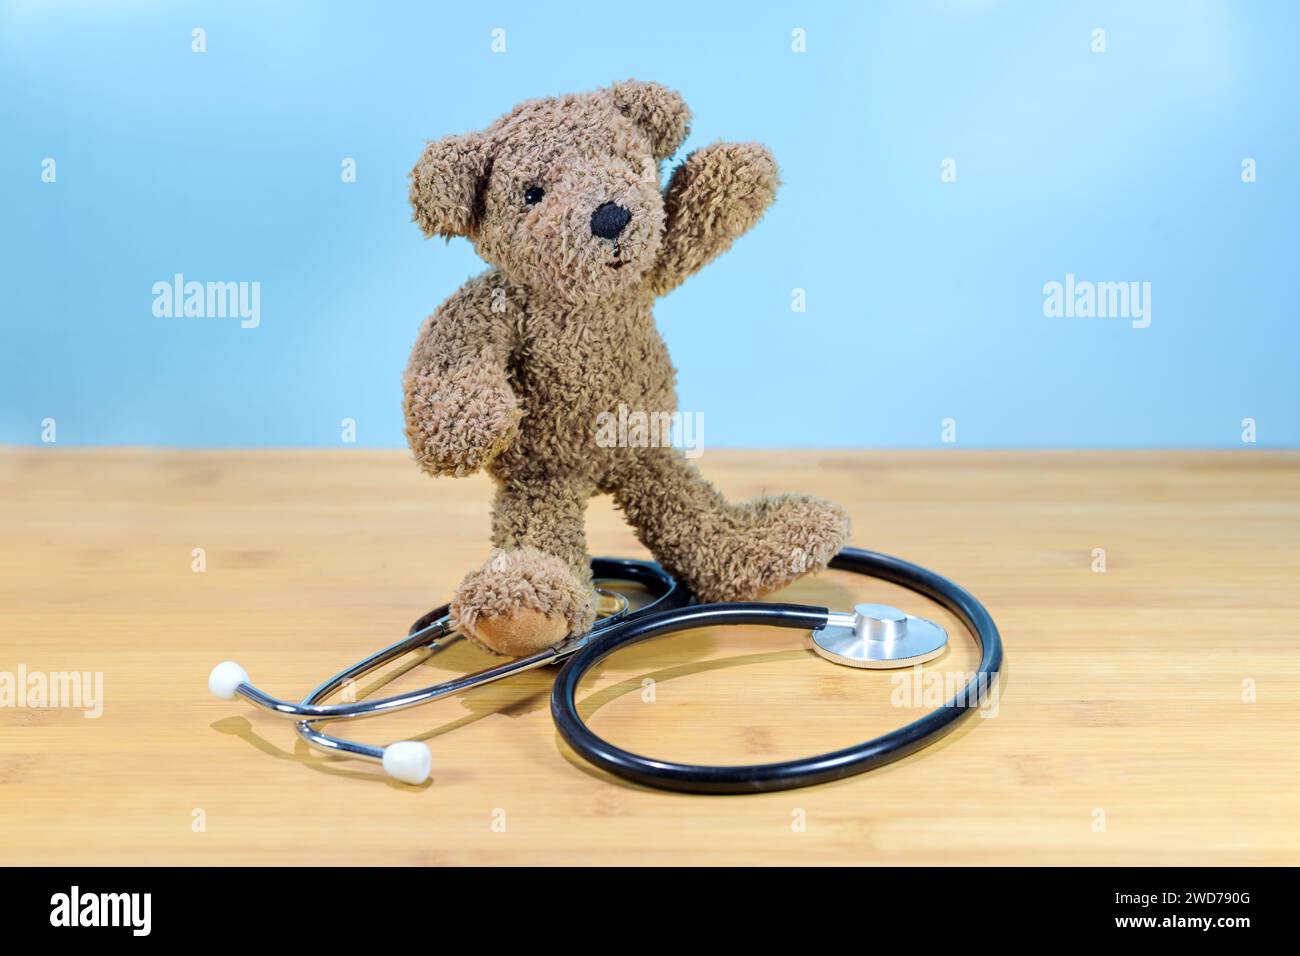 Little brown teddy bear standing on a stethoscope and waving, health care for children, pediatric medicine concept, blue background with copy space, s Stock Photo